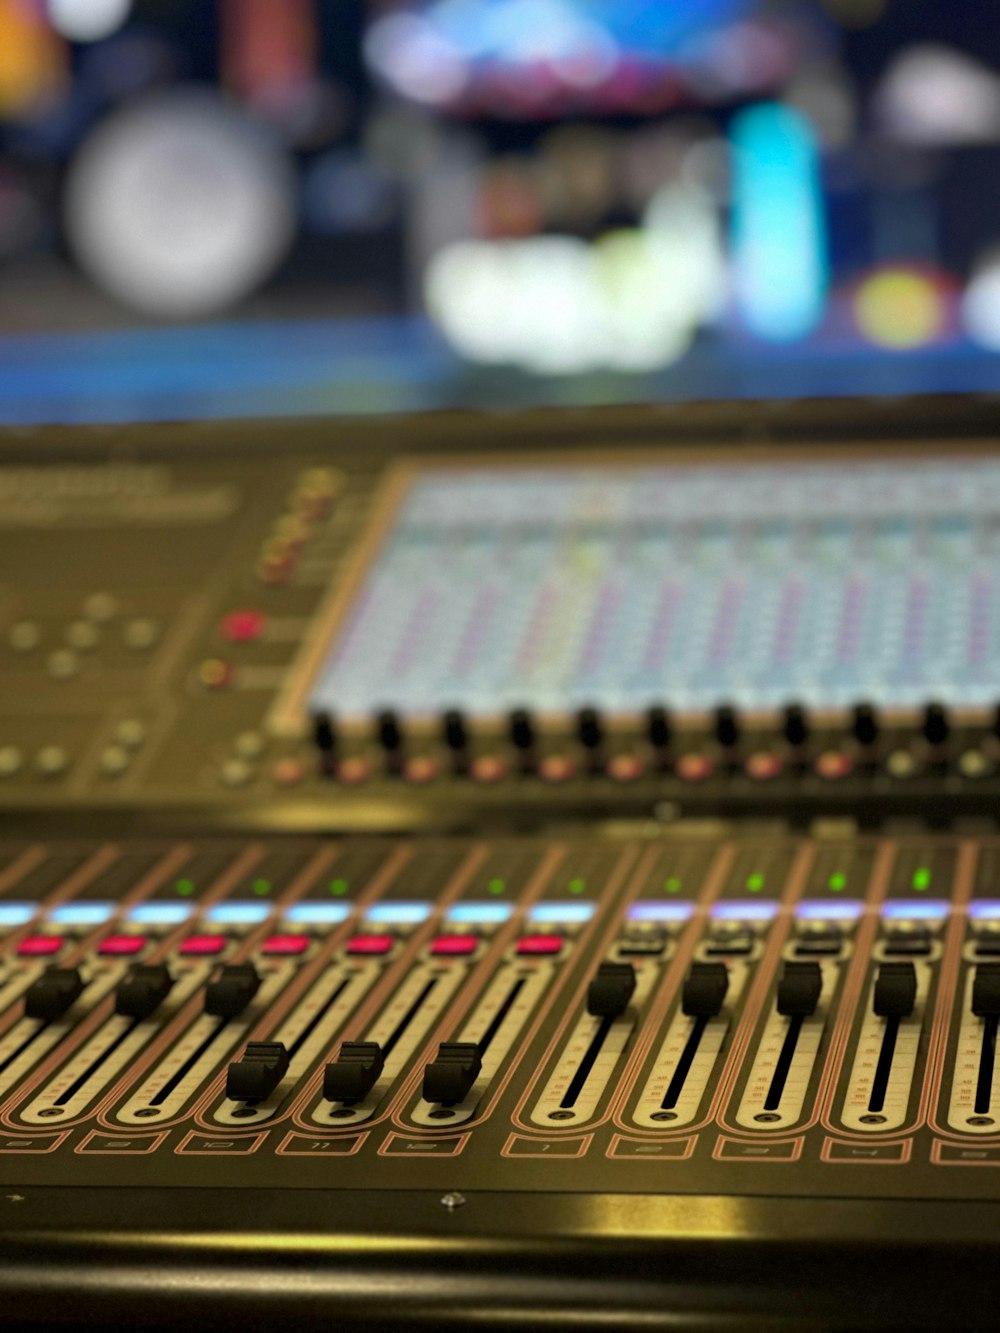 a close up of a sound mixing console